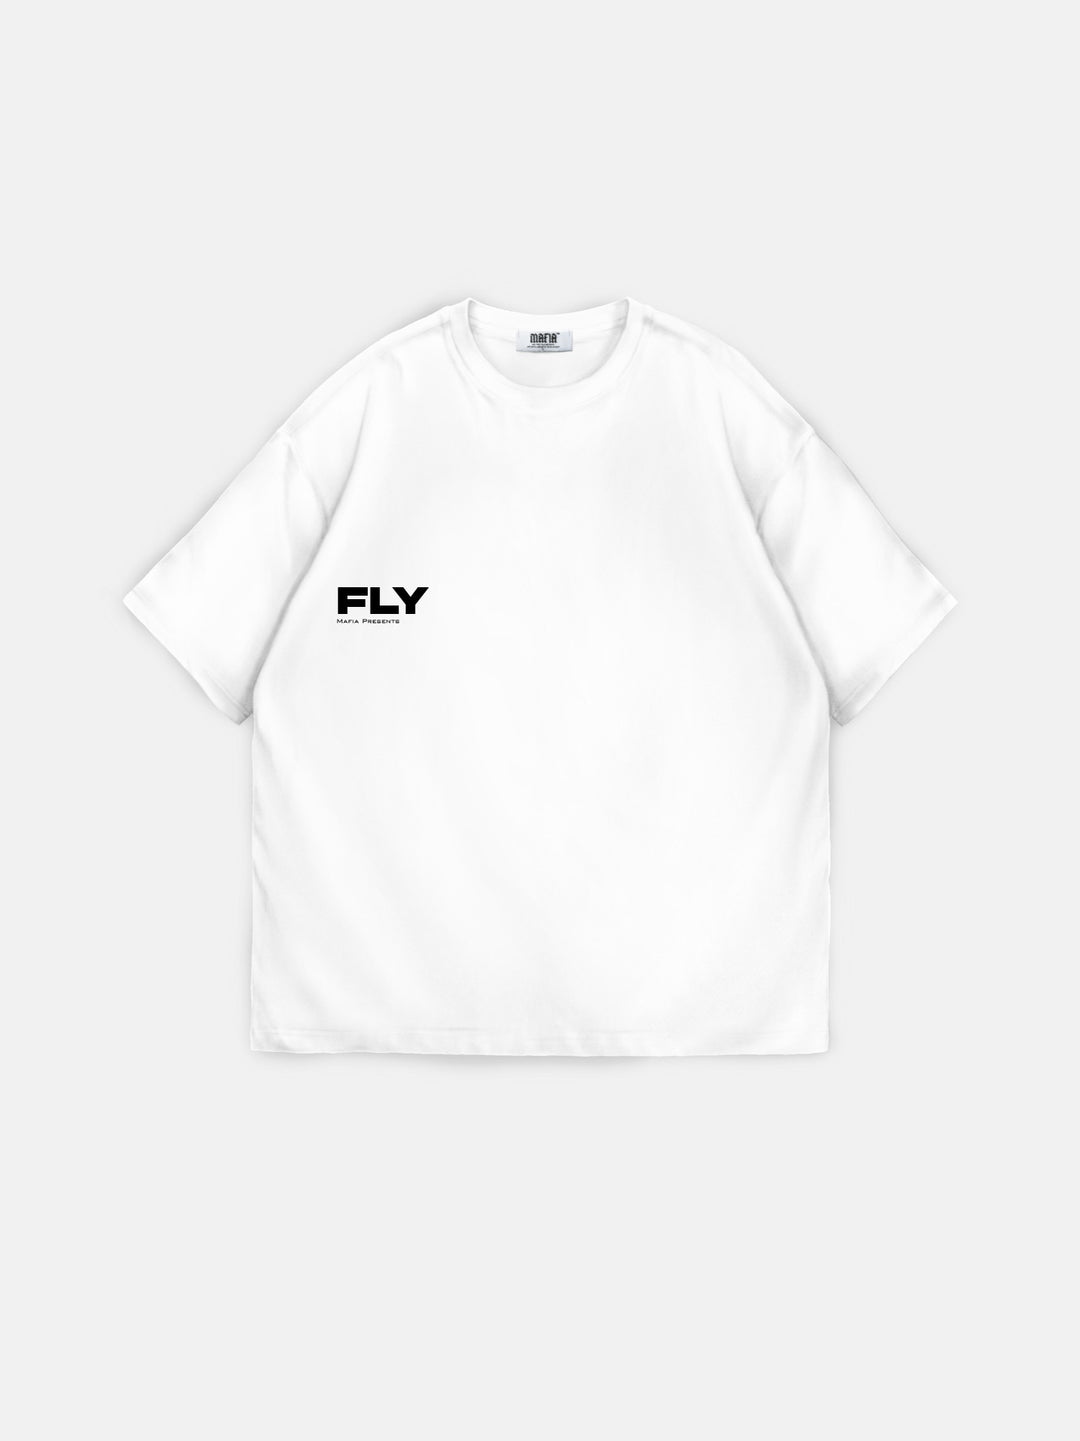 Oversize 'Fly' T-shirt - White and Pink